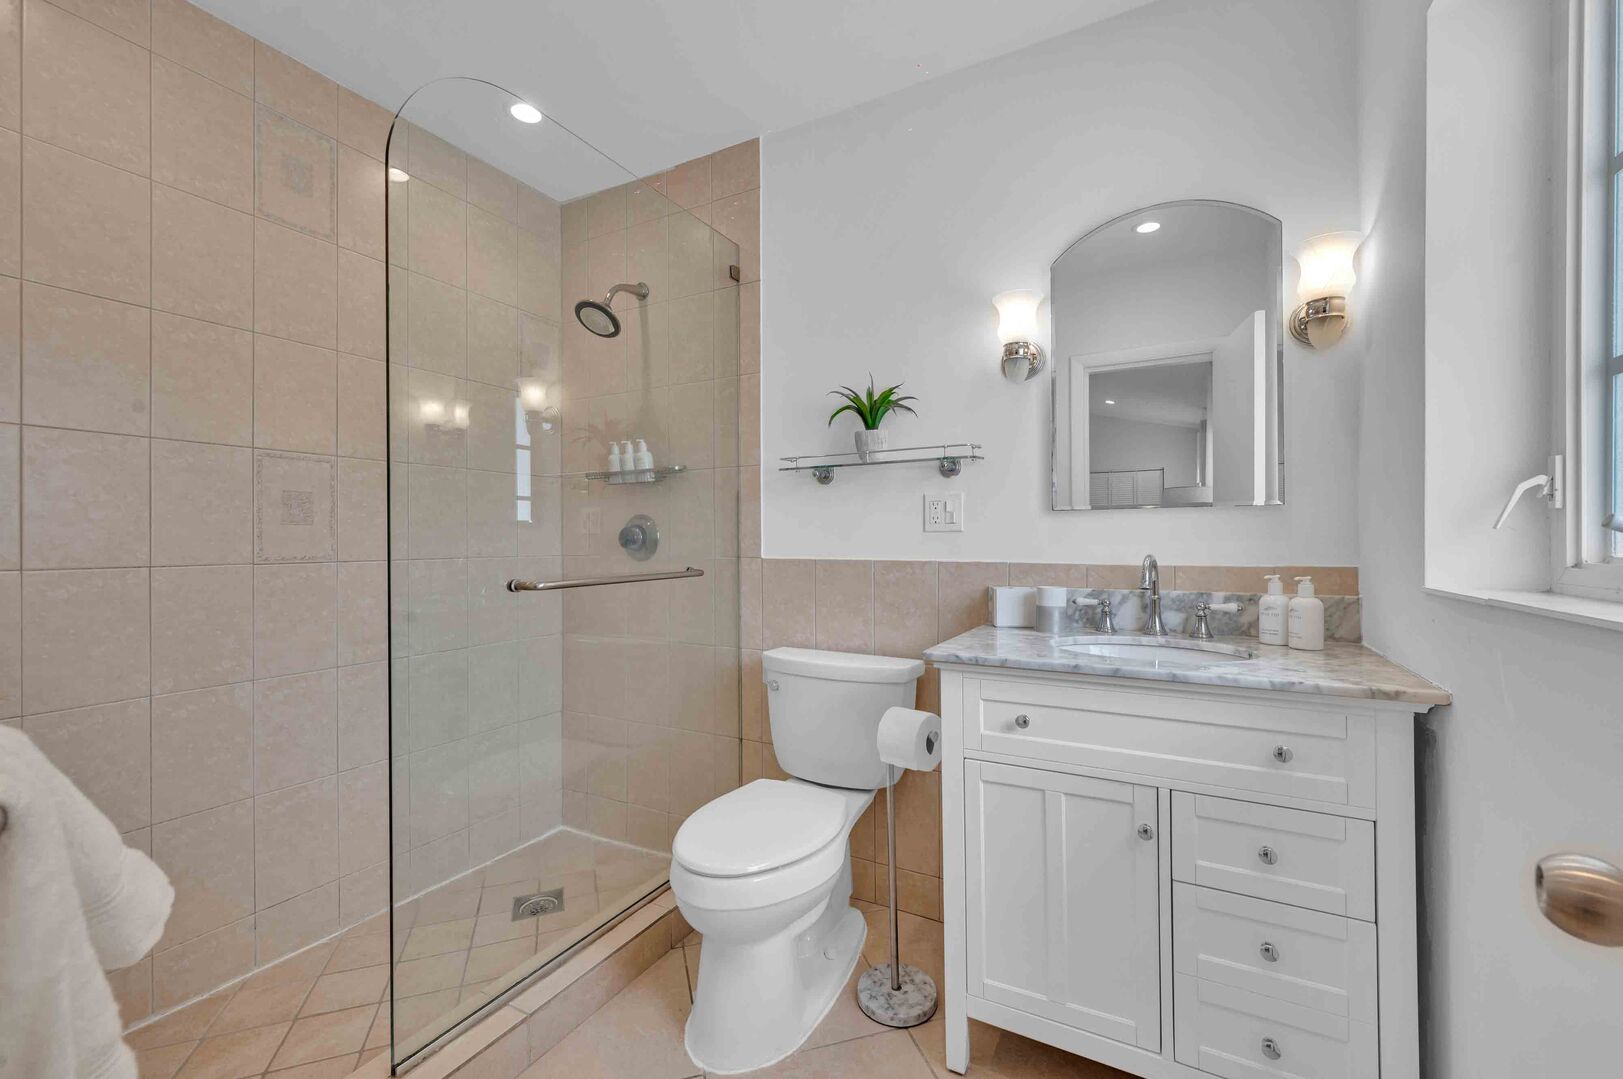 The master bathroom is quaint, with a walk-in shower.